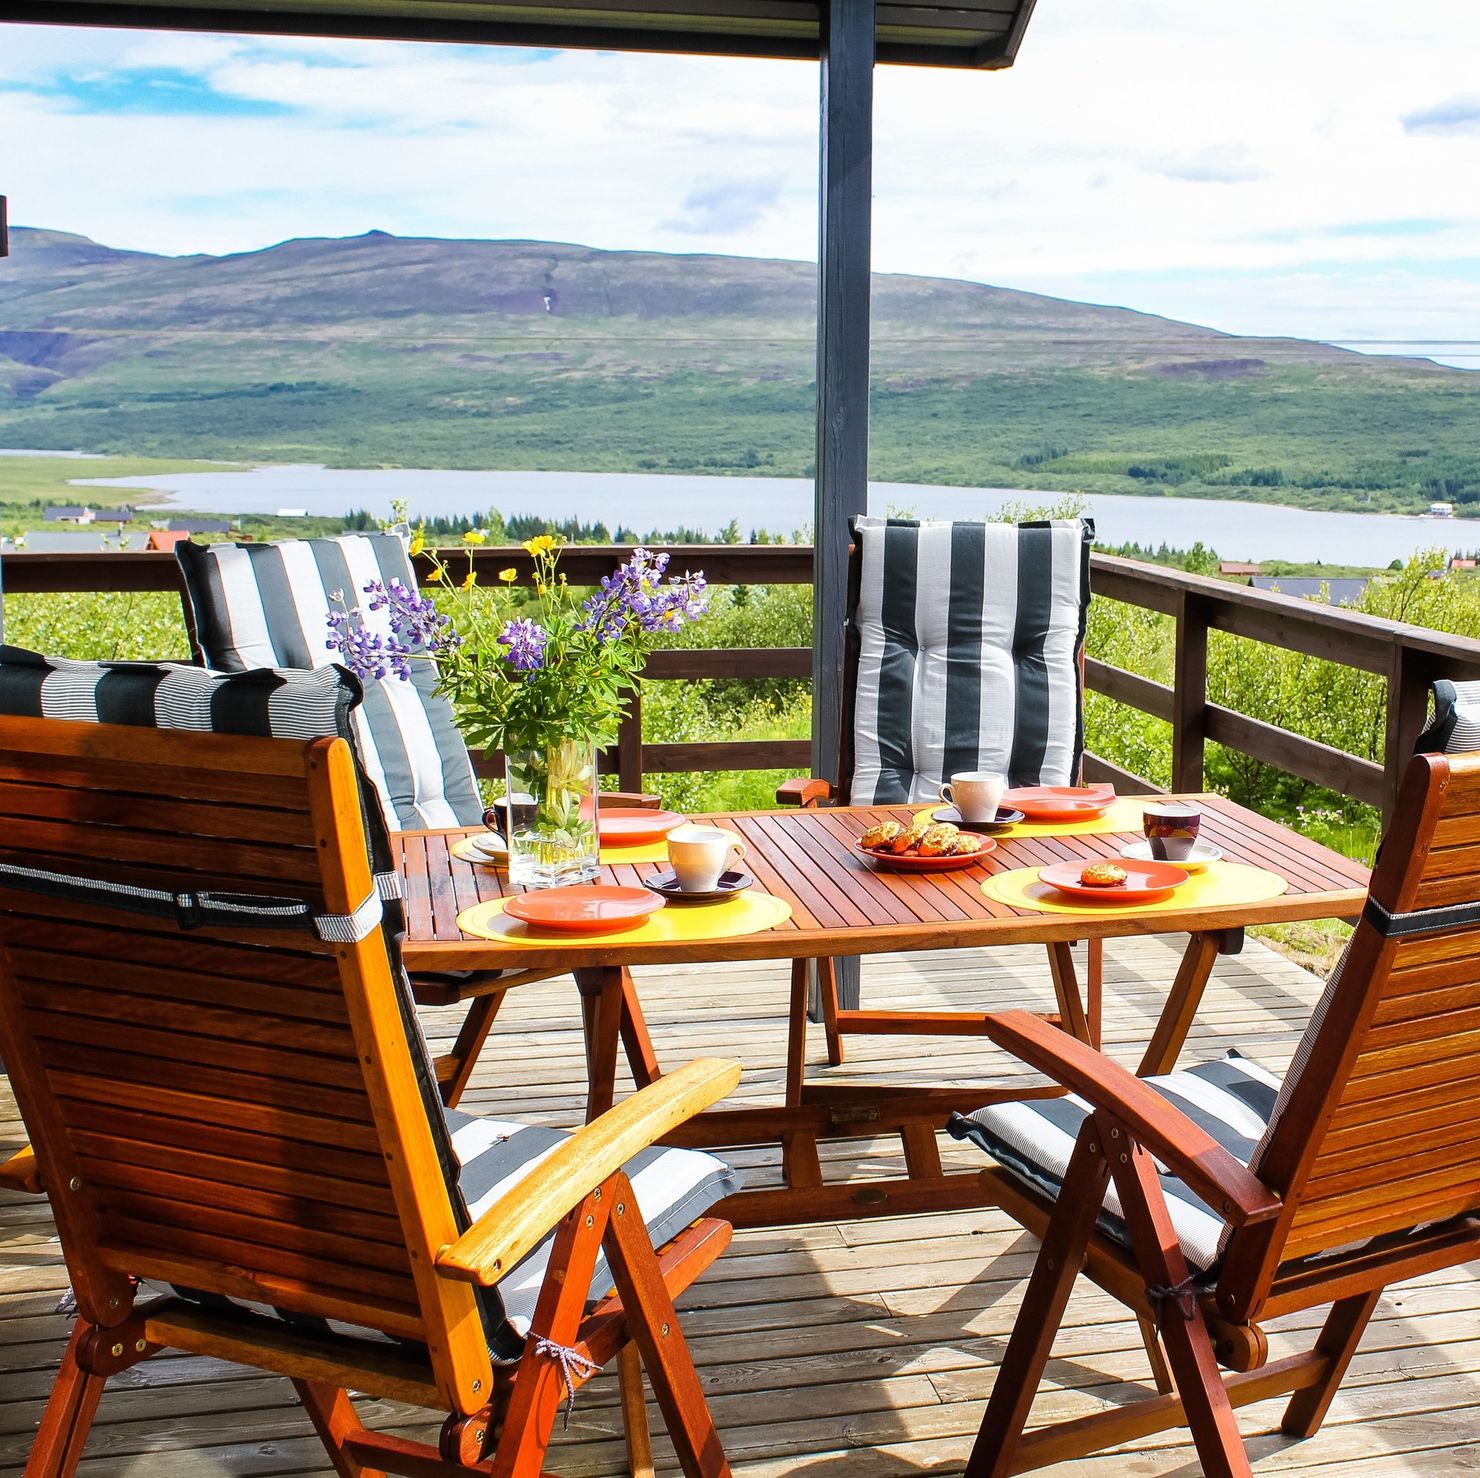 Unforgettable: A terrace with garden furniture and a stunning view to the mountains and over the lake